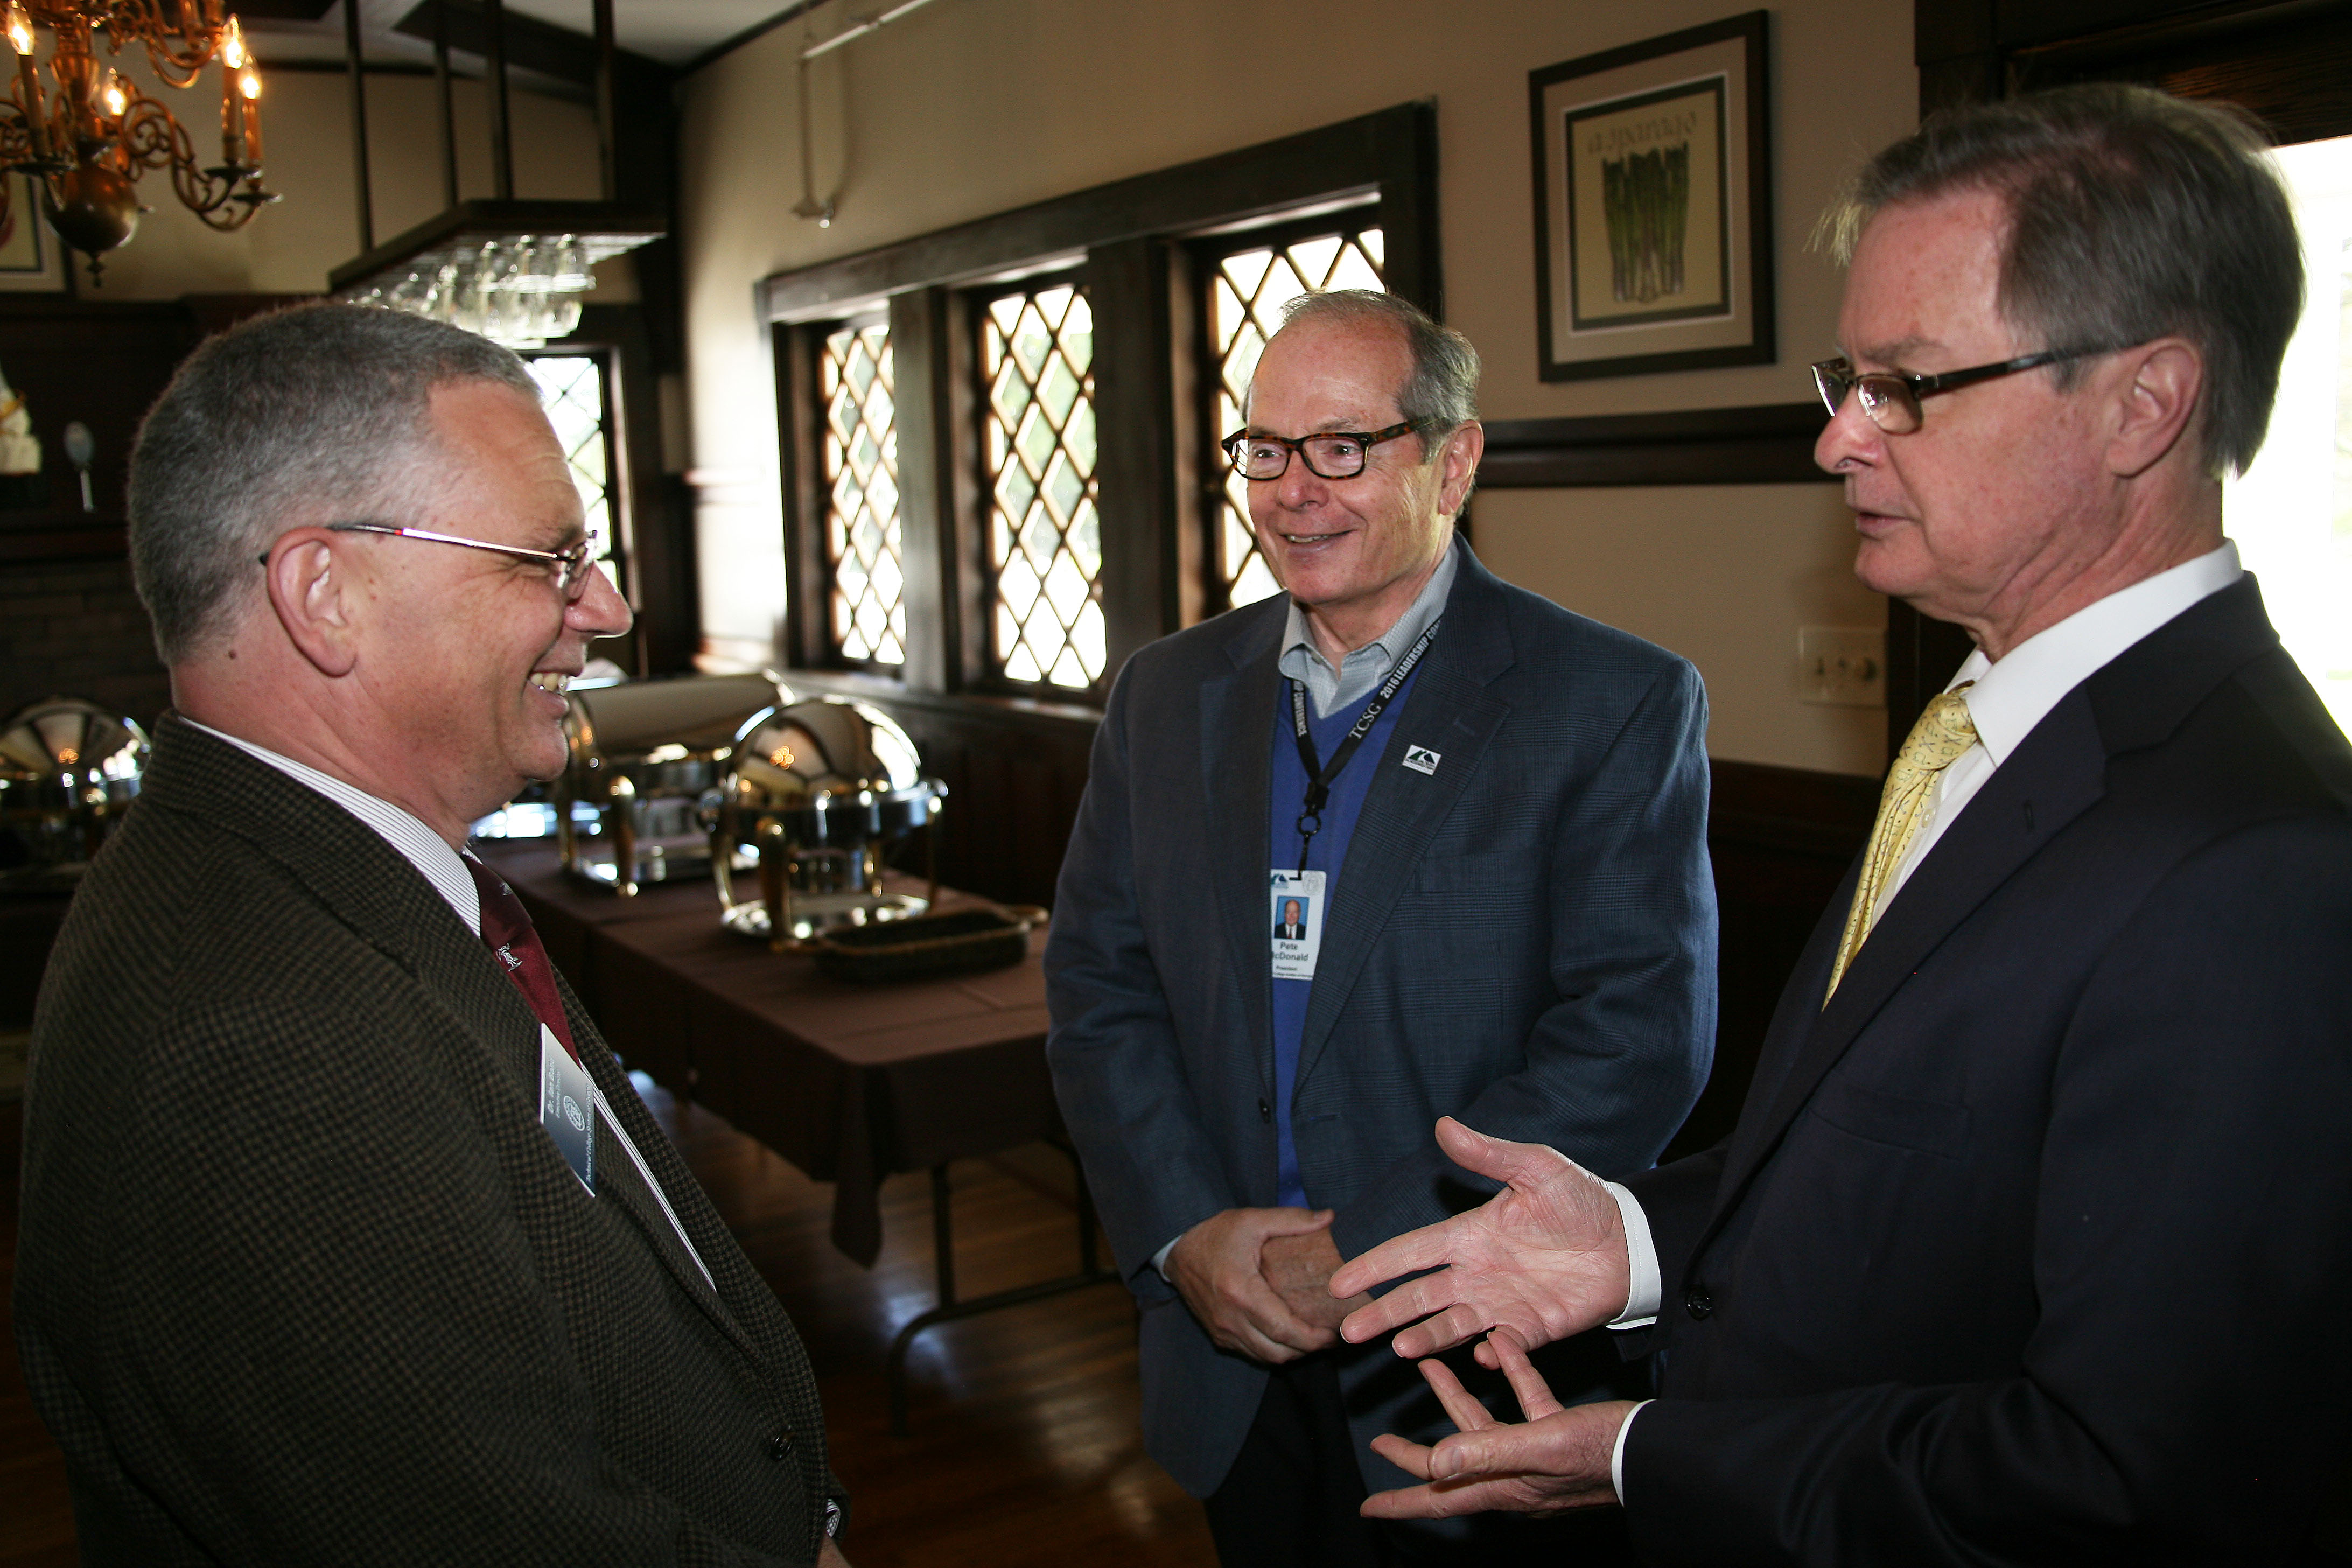 Dr. Ian Bond (left), executive director of the International Center, TCSG; Pete McDonald (center), president, GNTC; and Al Hodge (right) president and CEO, Rome Floyd Chamber, have a conversation before lunch begins at the Woodlee Building on GNTC’s Floyd County Campus.